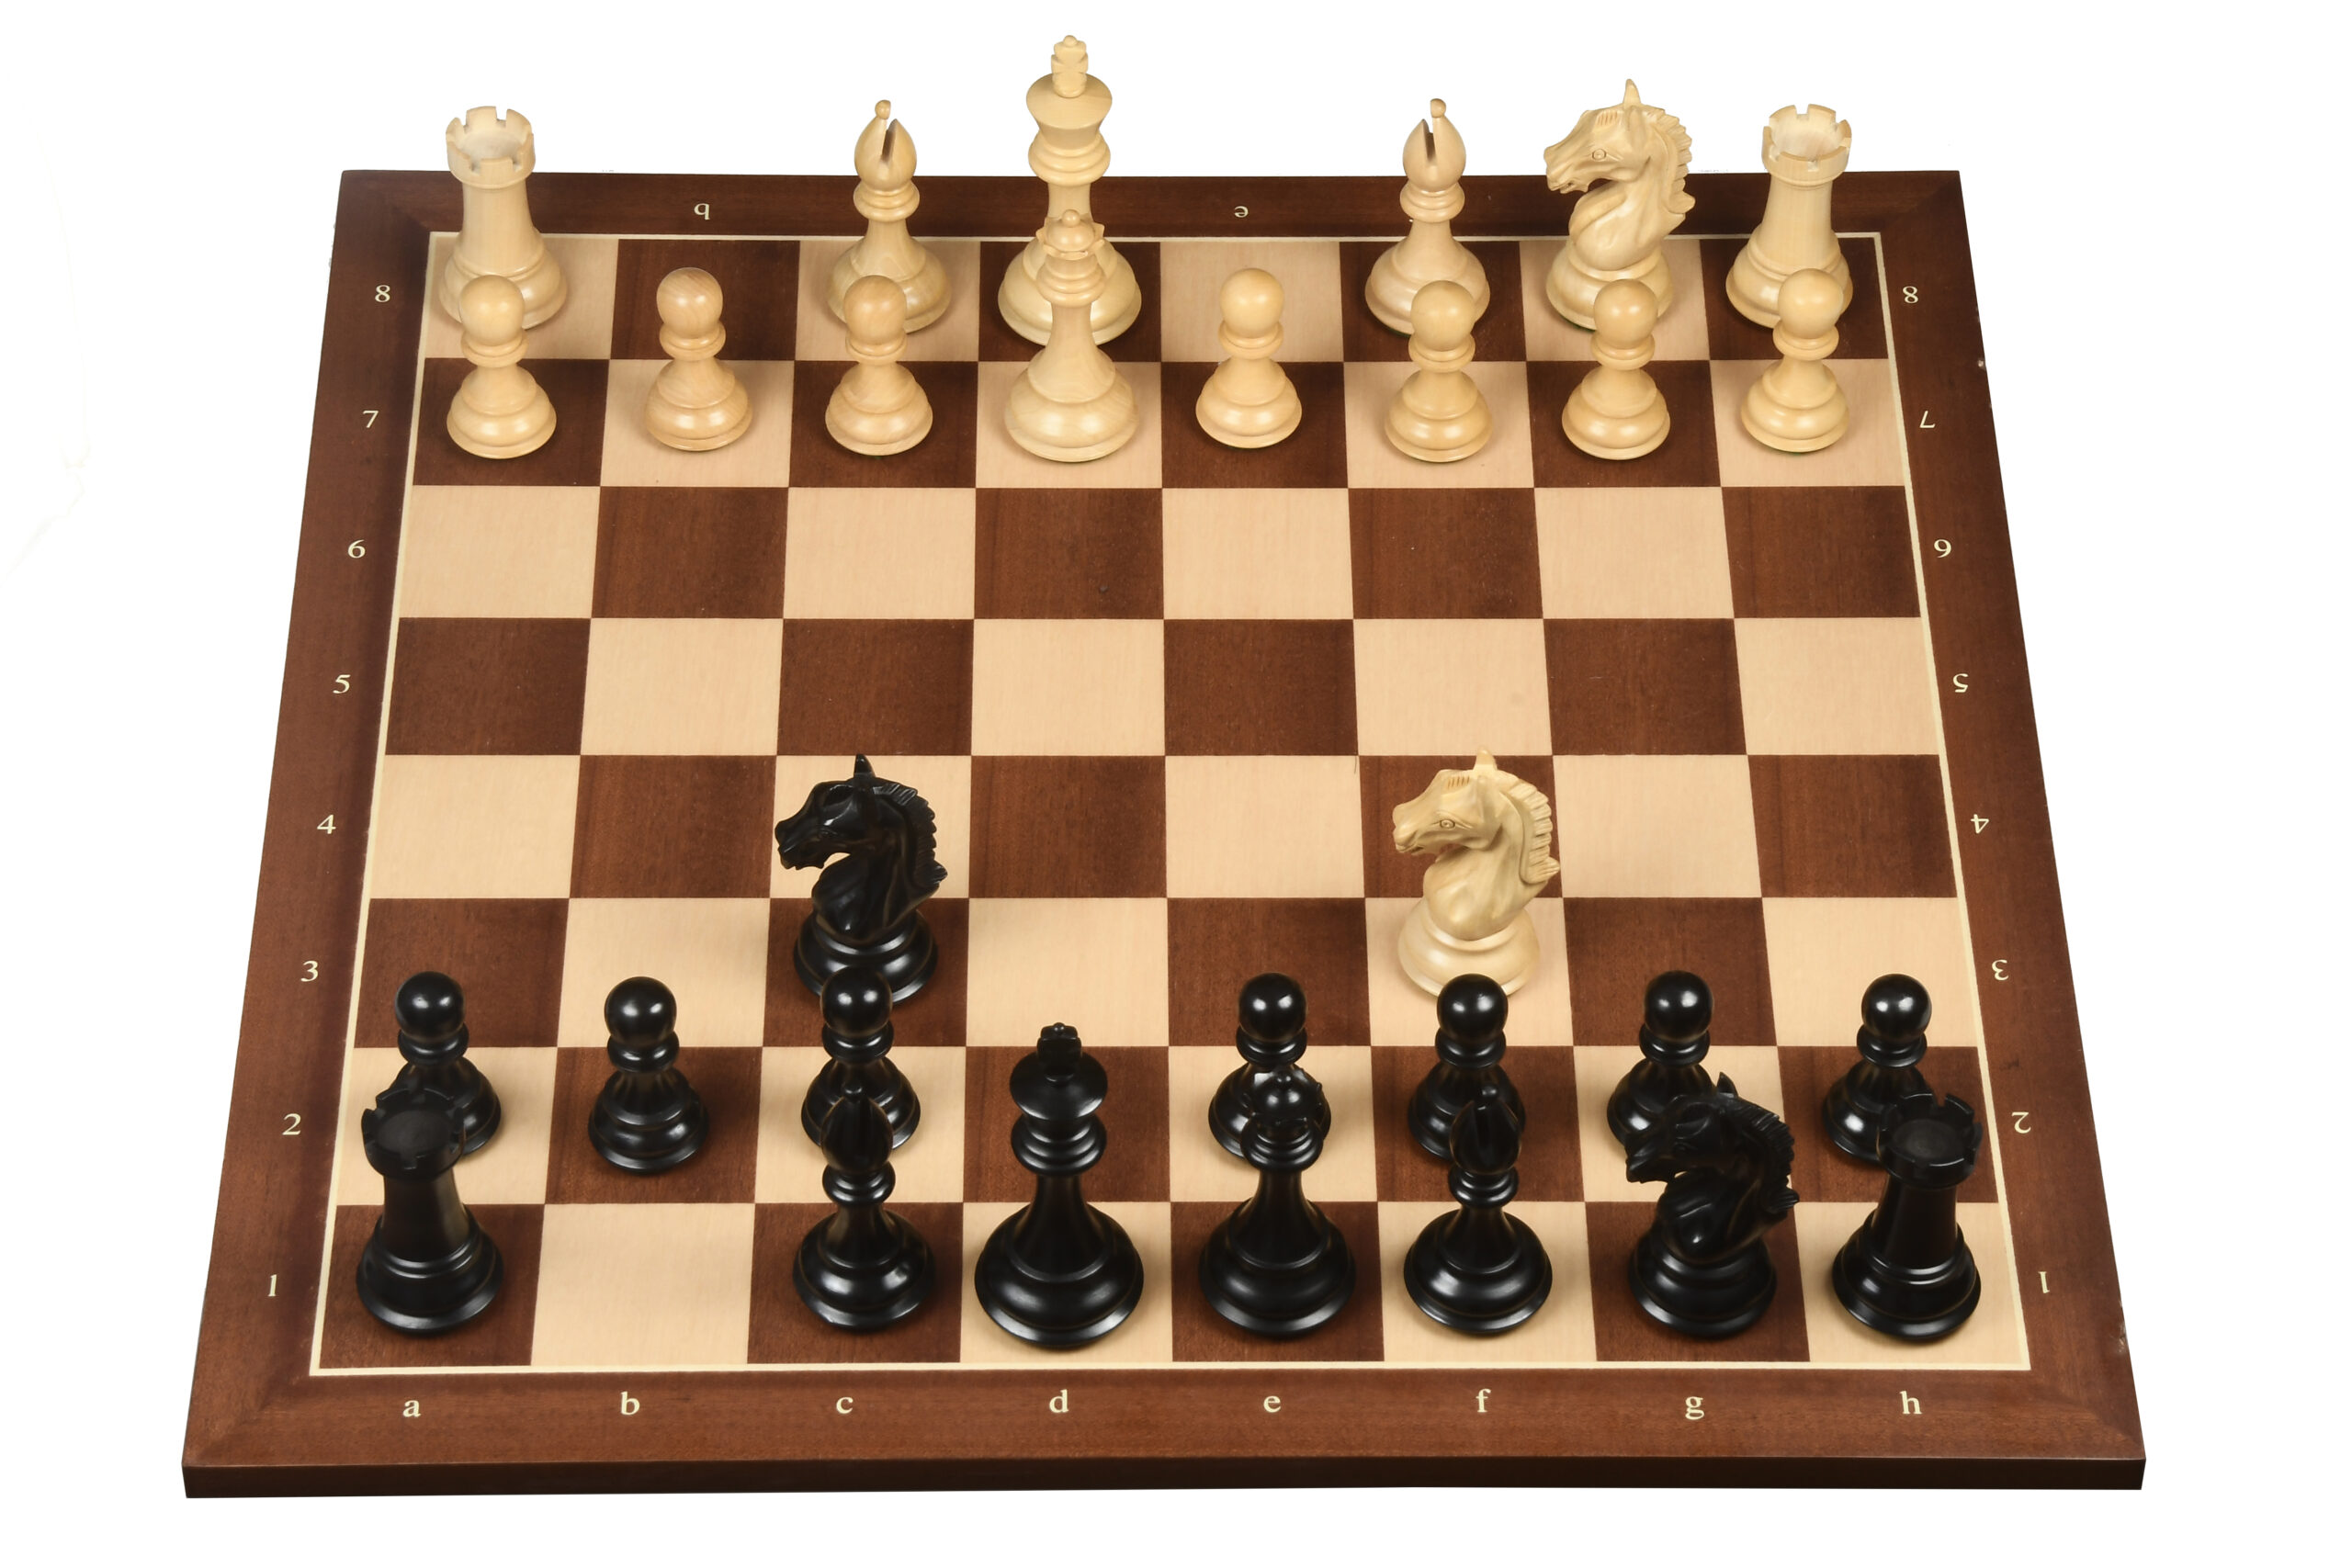 5 Best Chess Opening Traps For Black Against 1.d4 